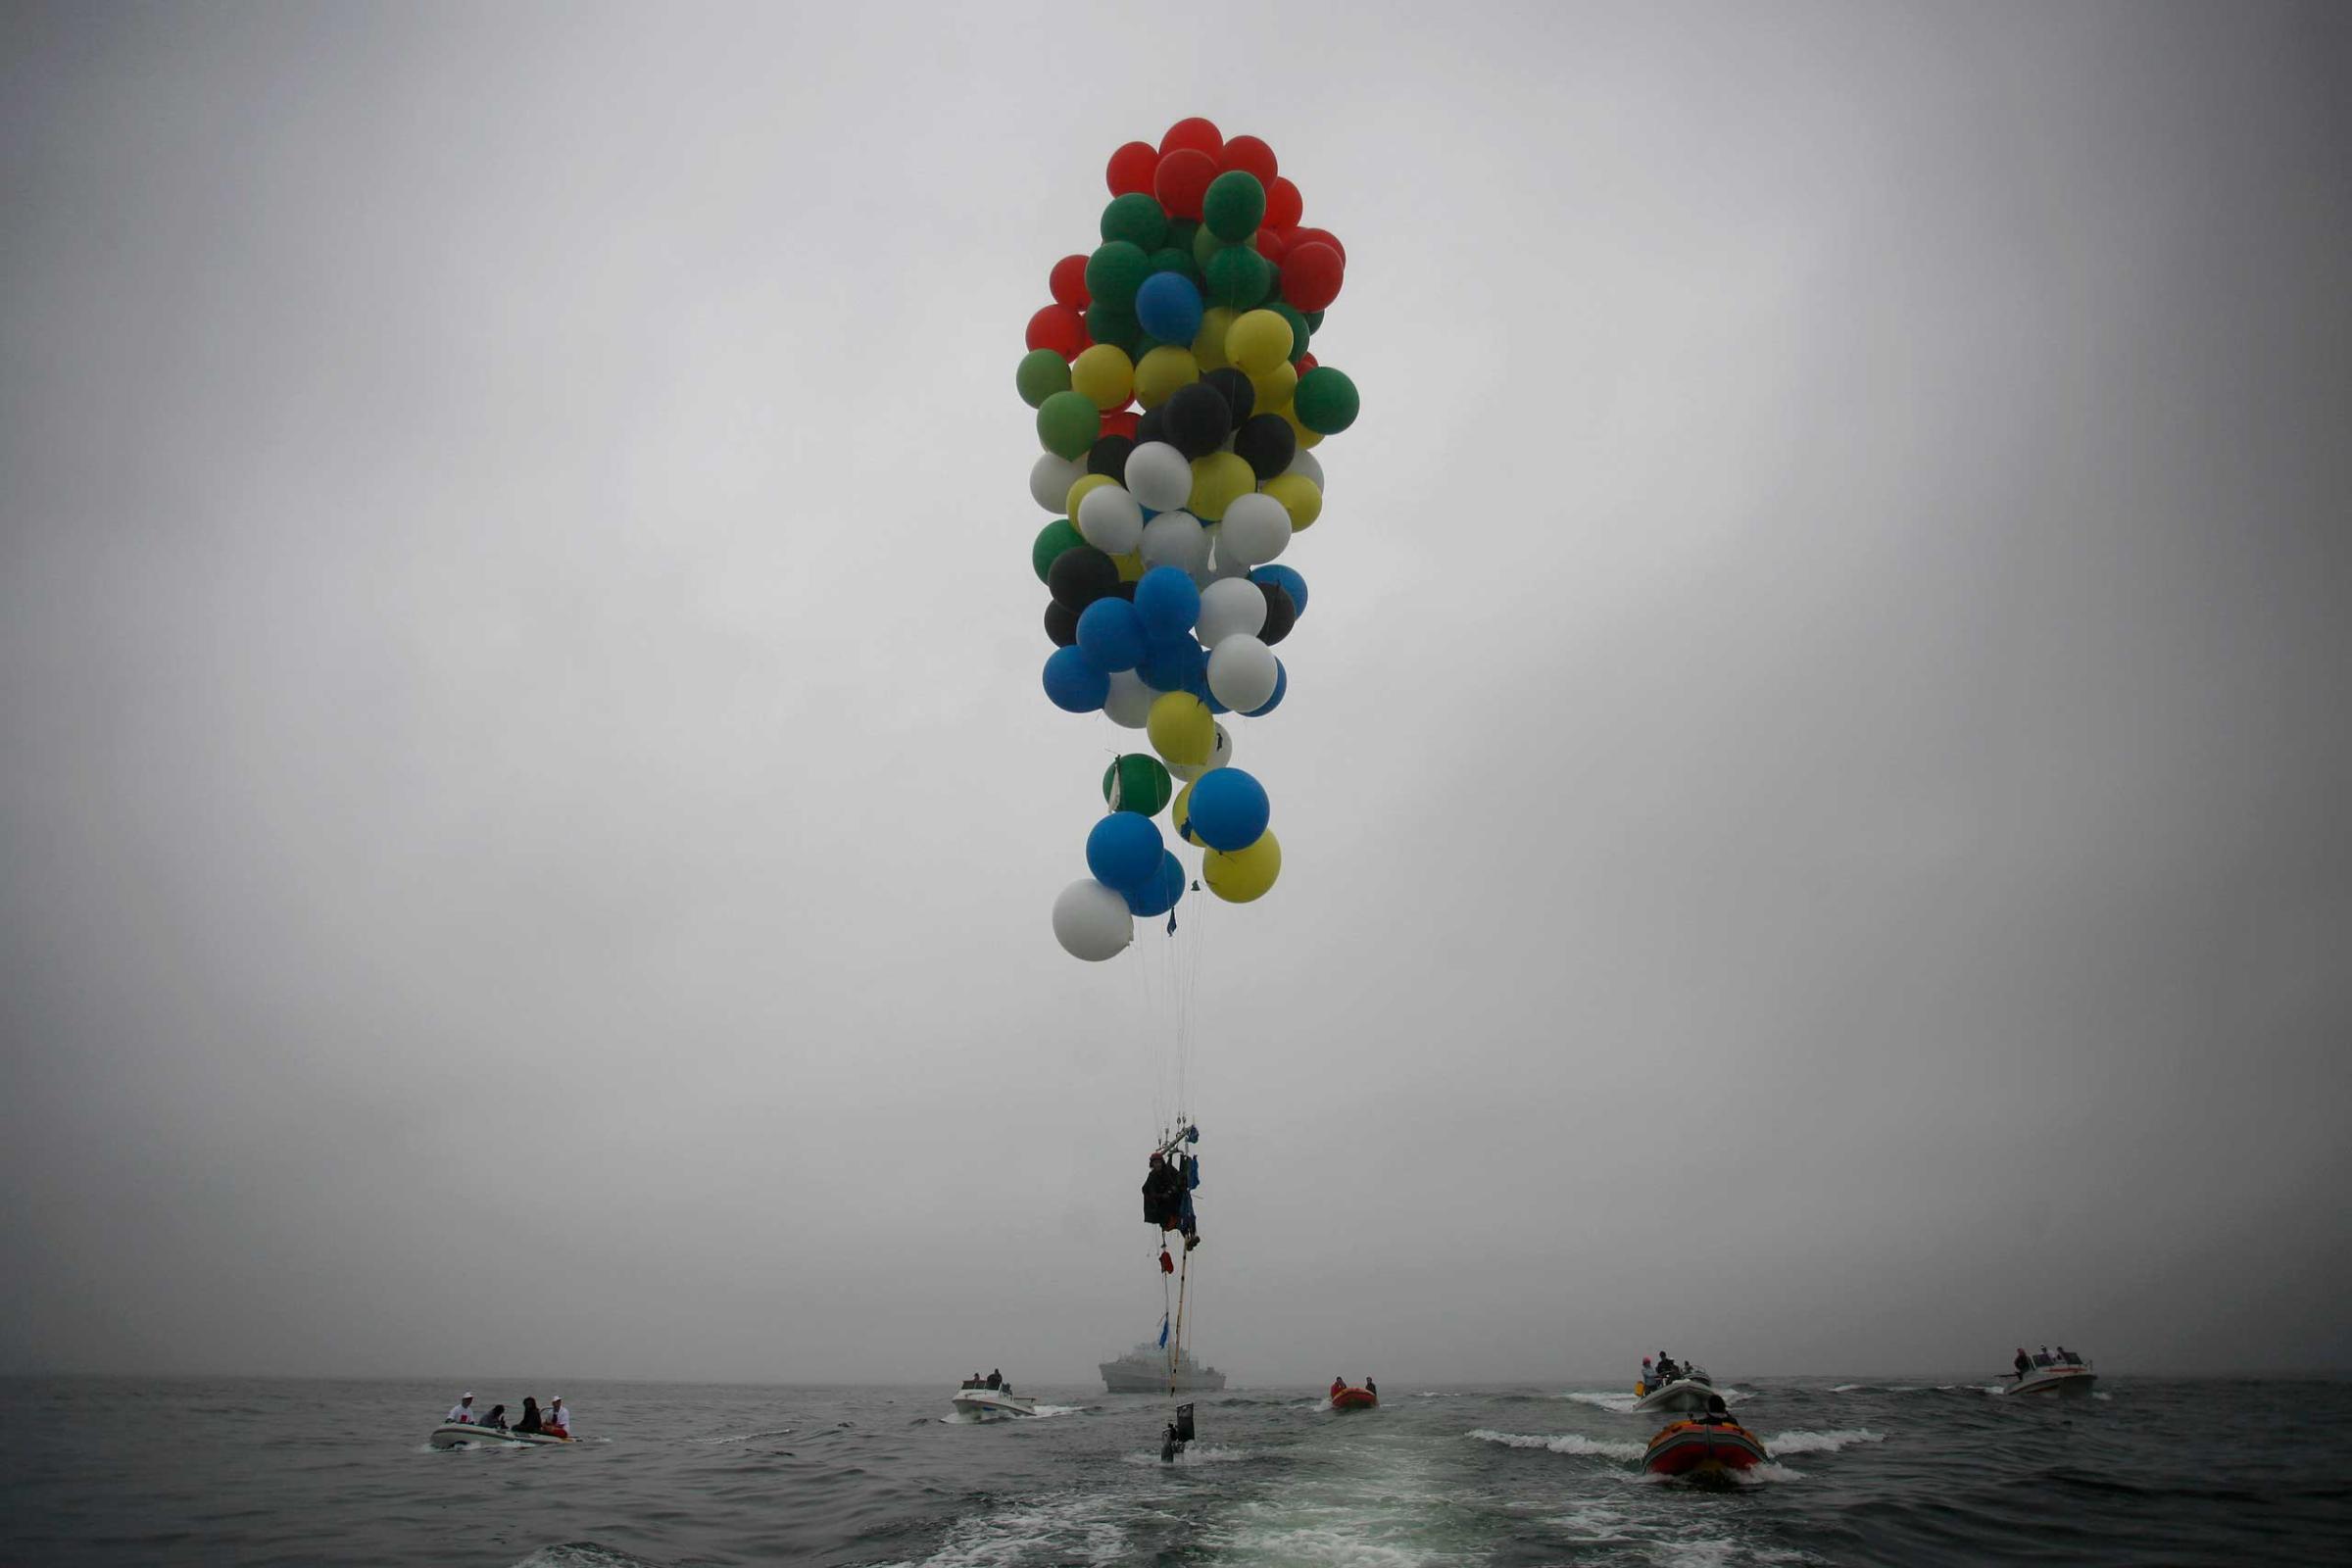 Silver-Vallance floats above the sea using helium filled balloons from the airfield of Robben Island across the Atlantic Ocean in Cape Town